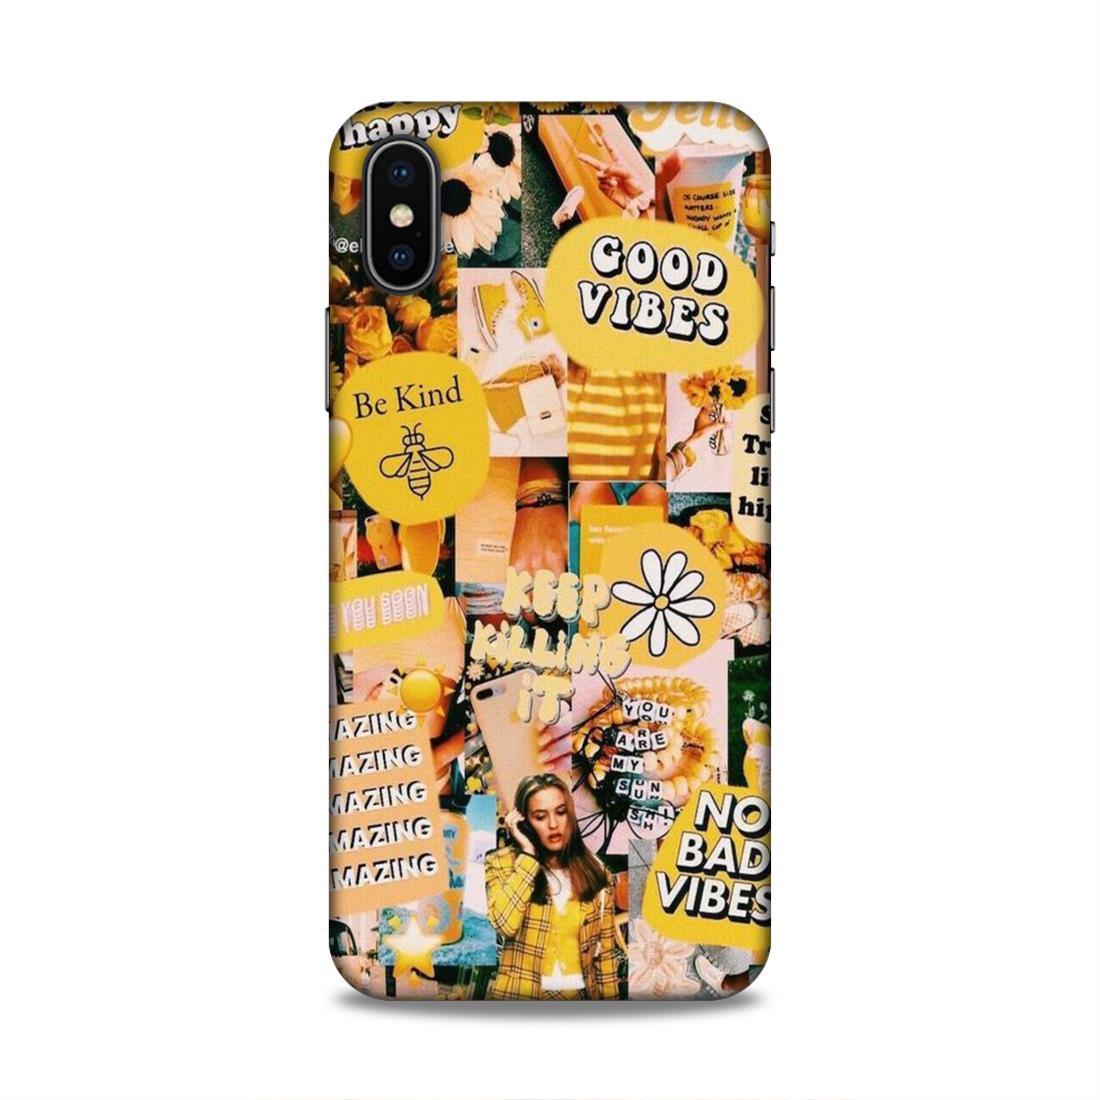 Keep killing It iPhone XS Mobile Back Cover